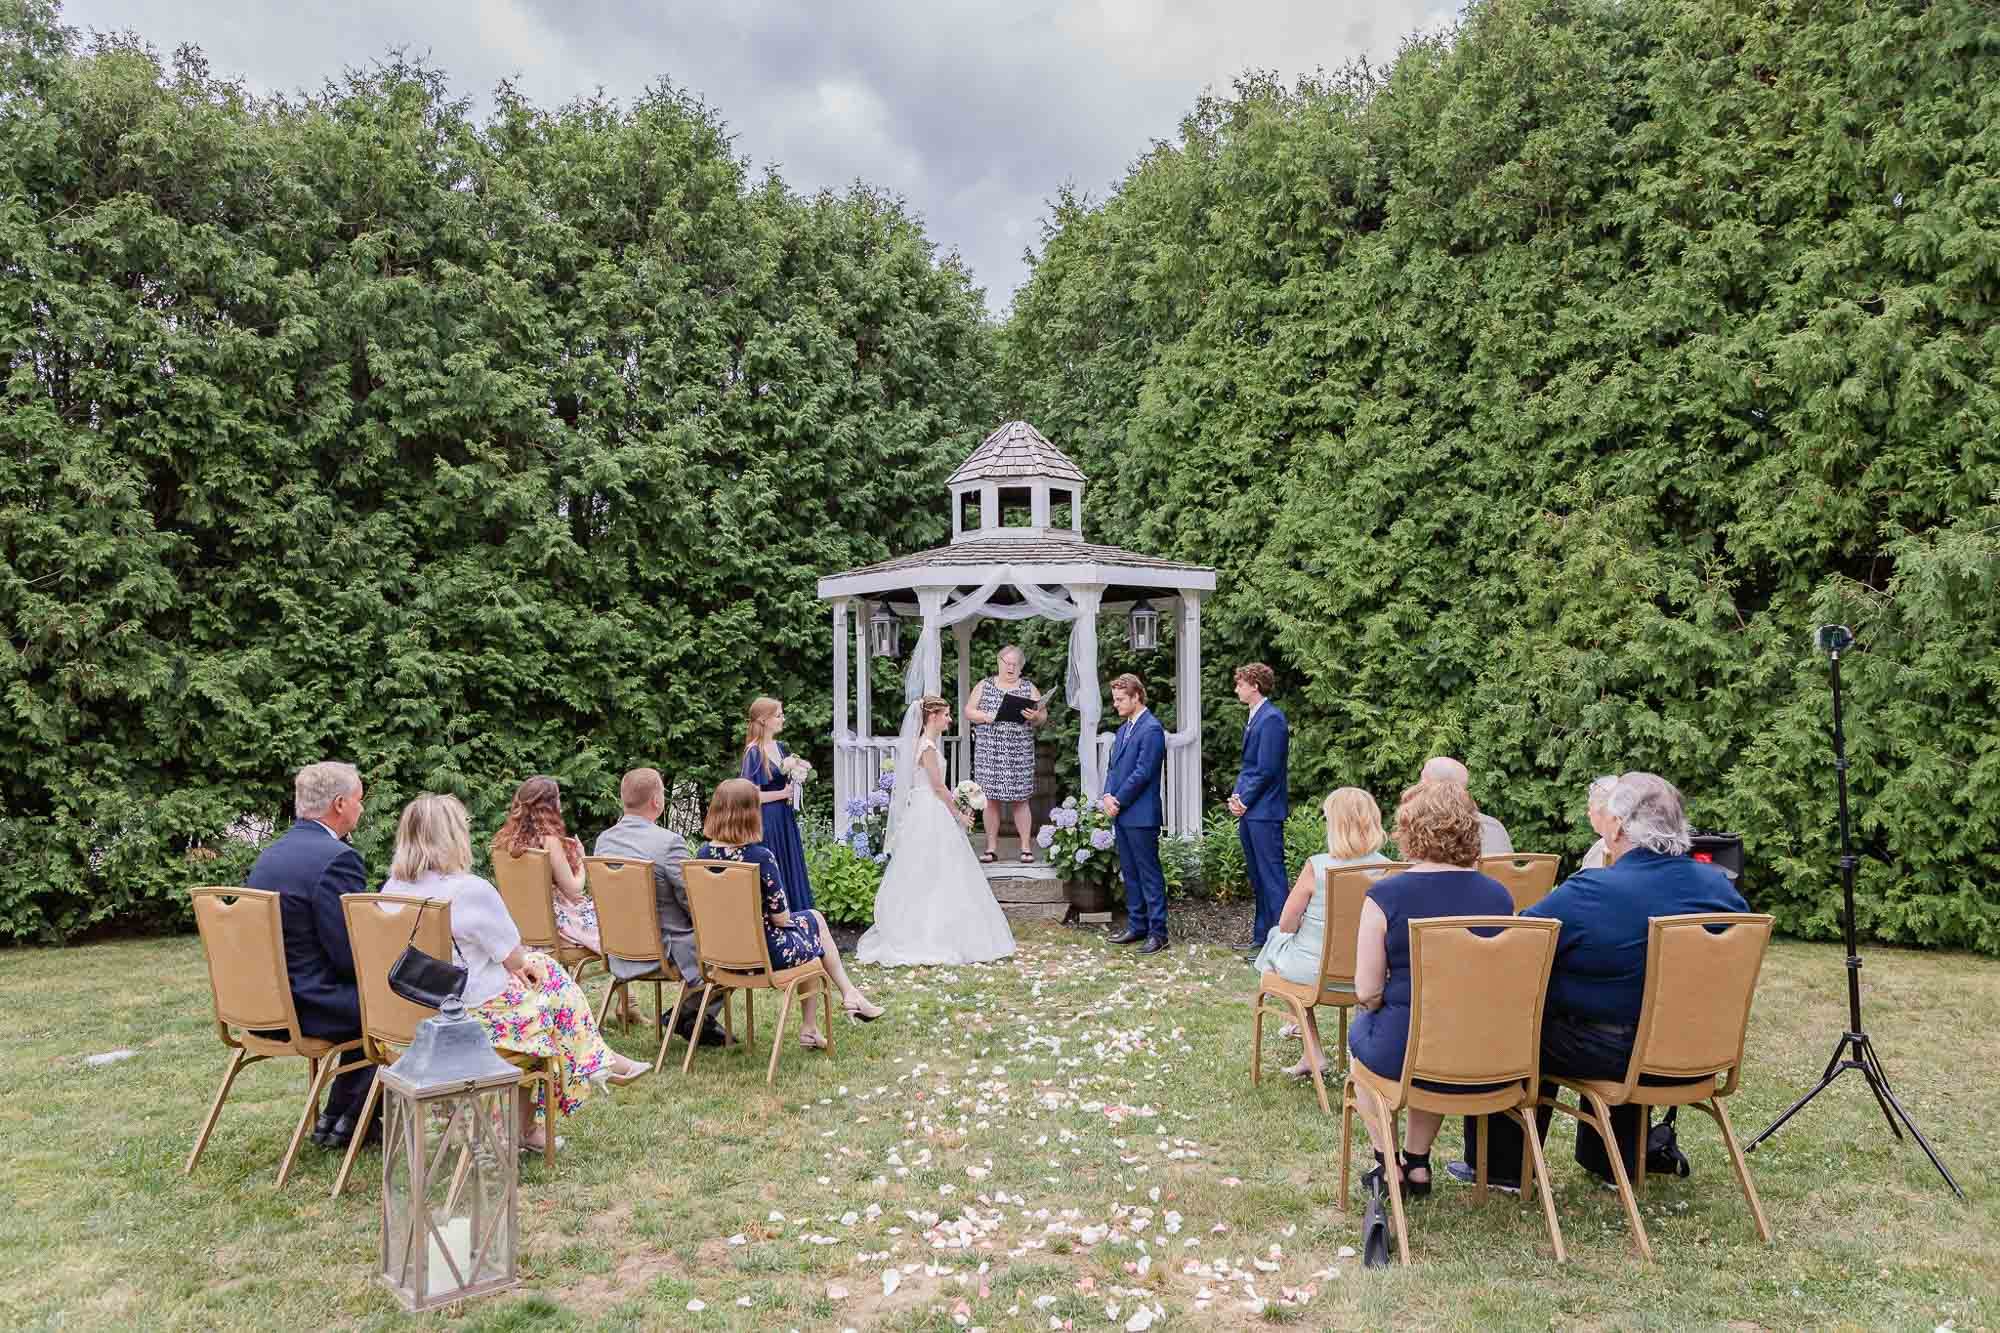 Small outdoor wedding ceremony at the Exeter Inn gazebo